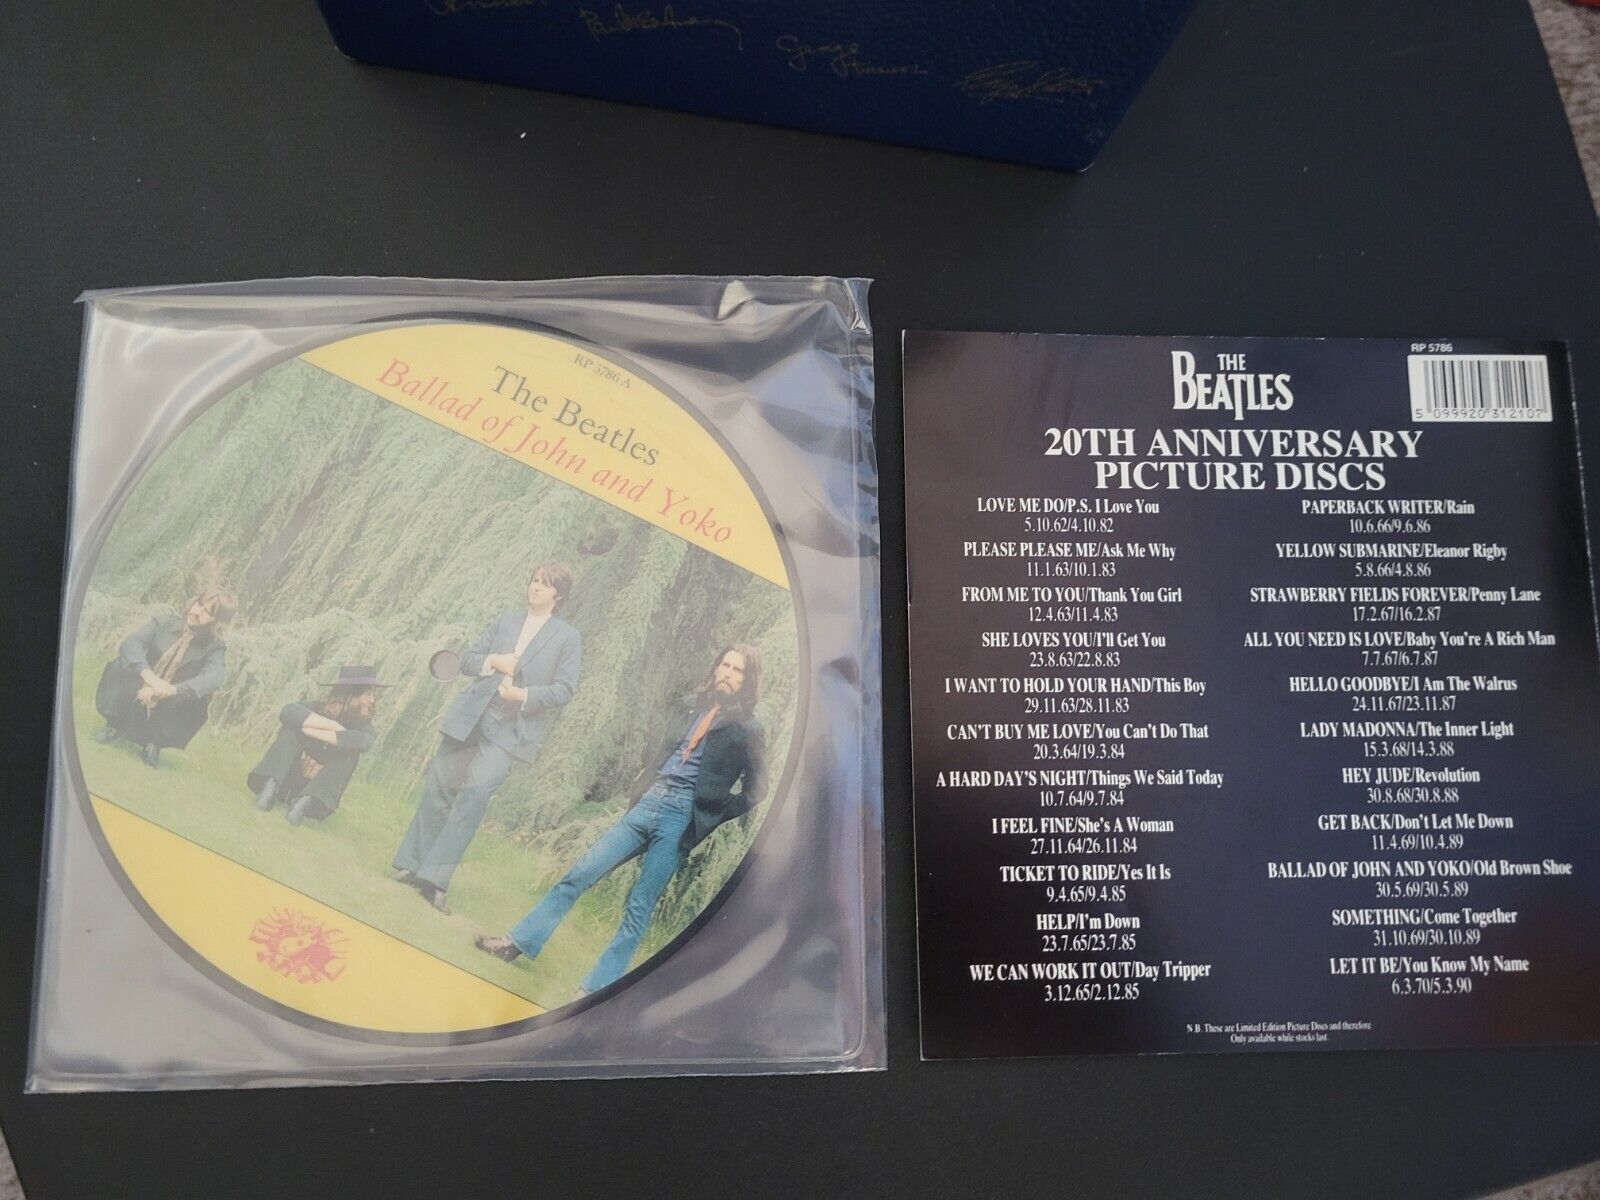 1989 Beatles Picture Disc Single The Ballad of John and Yoko and Old Brown Shoe